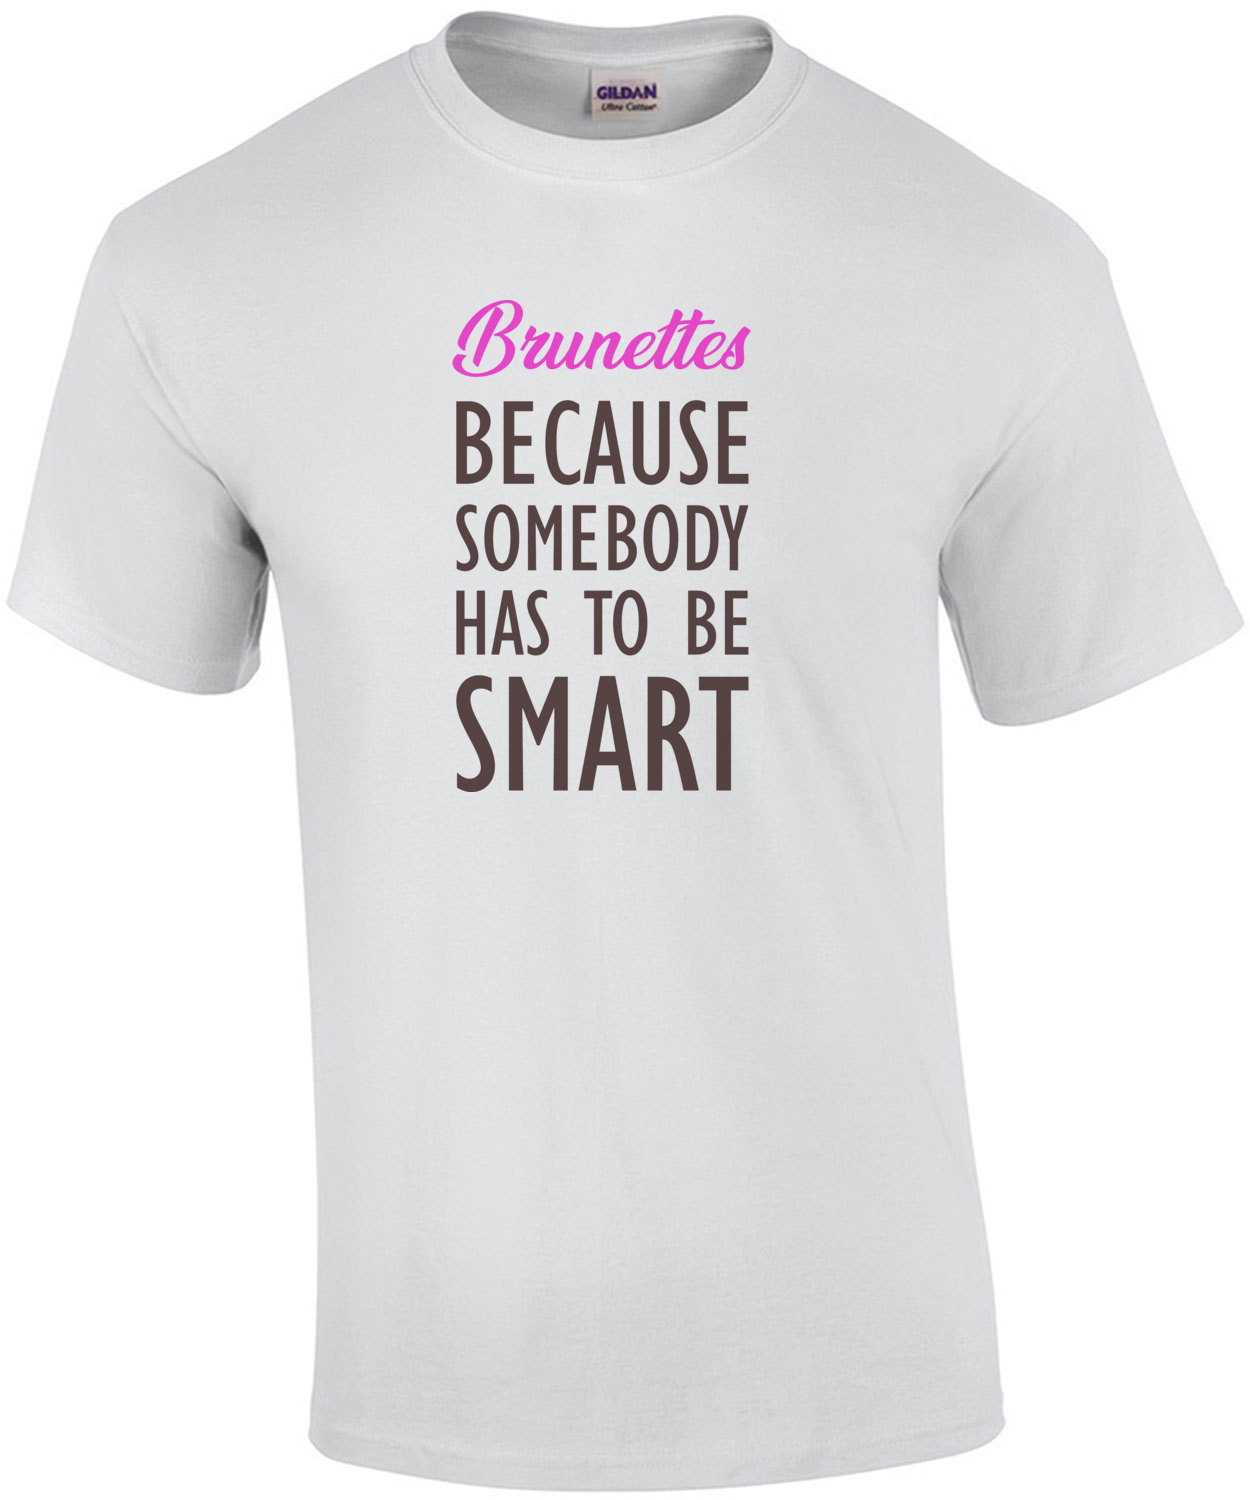 Brunettes - Because somebody has to be smart - ladies t-shirt